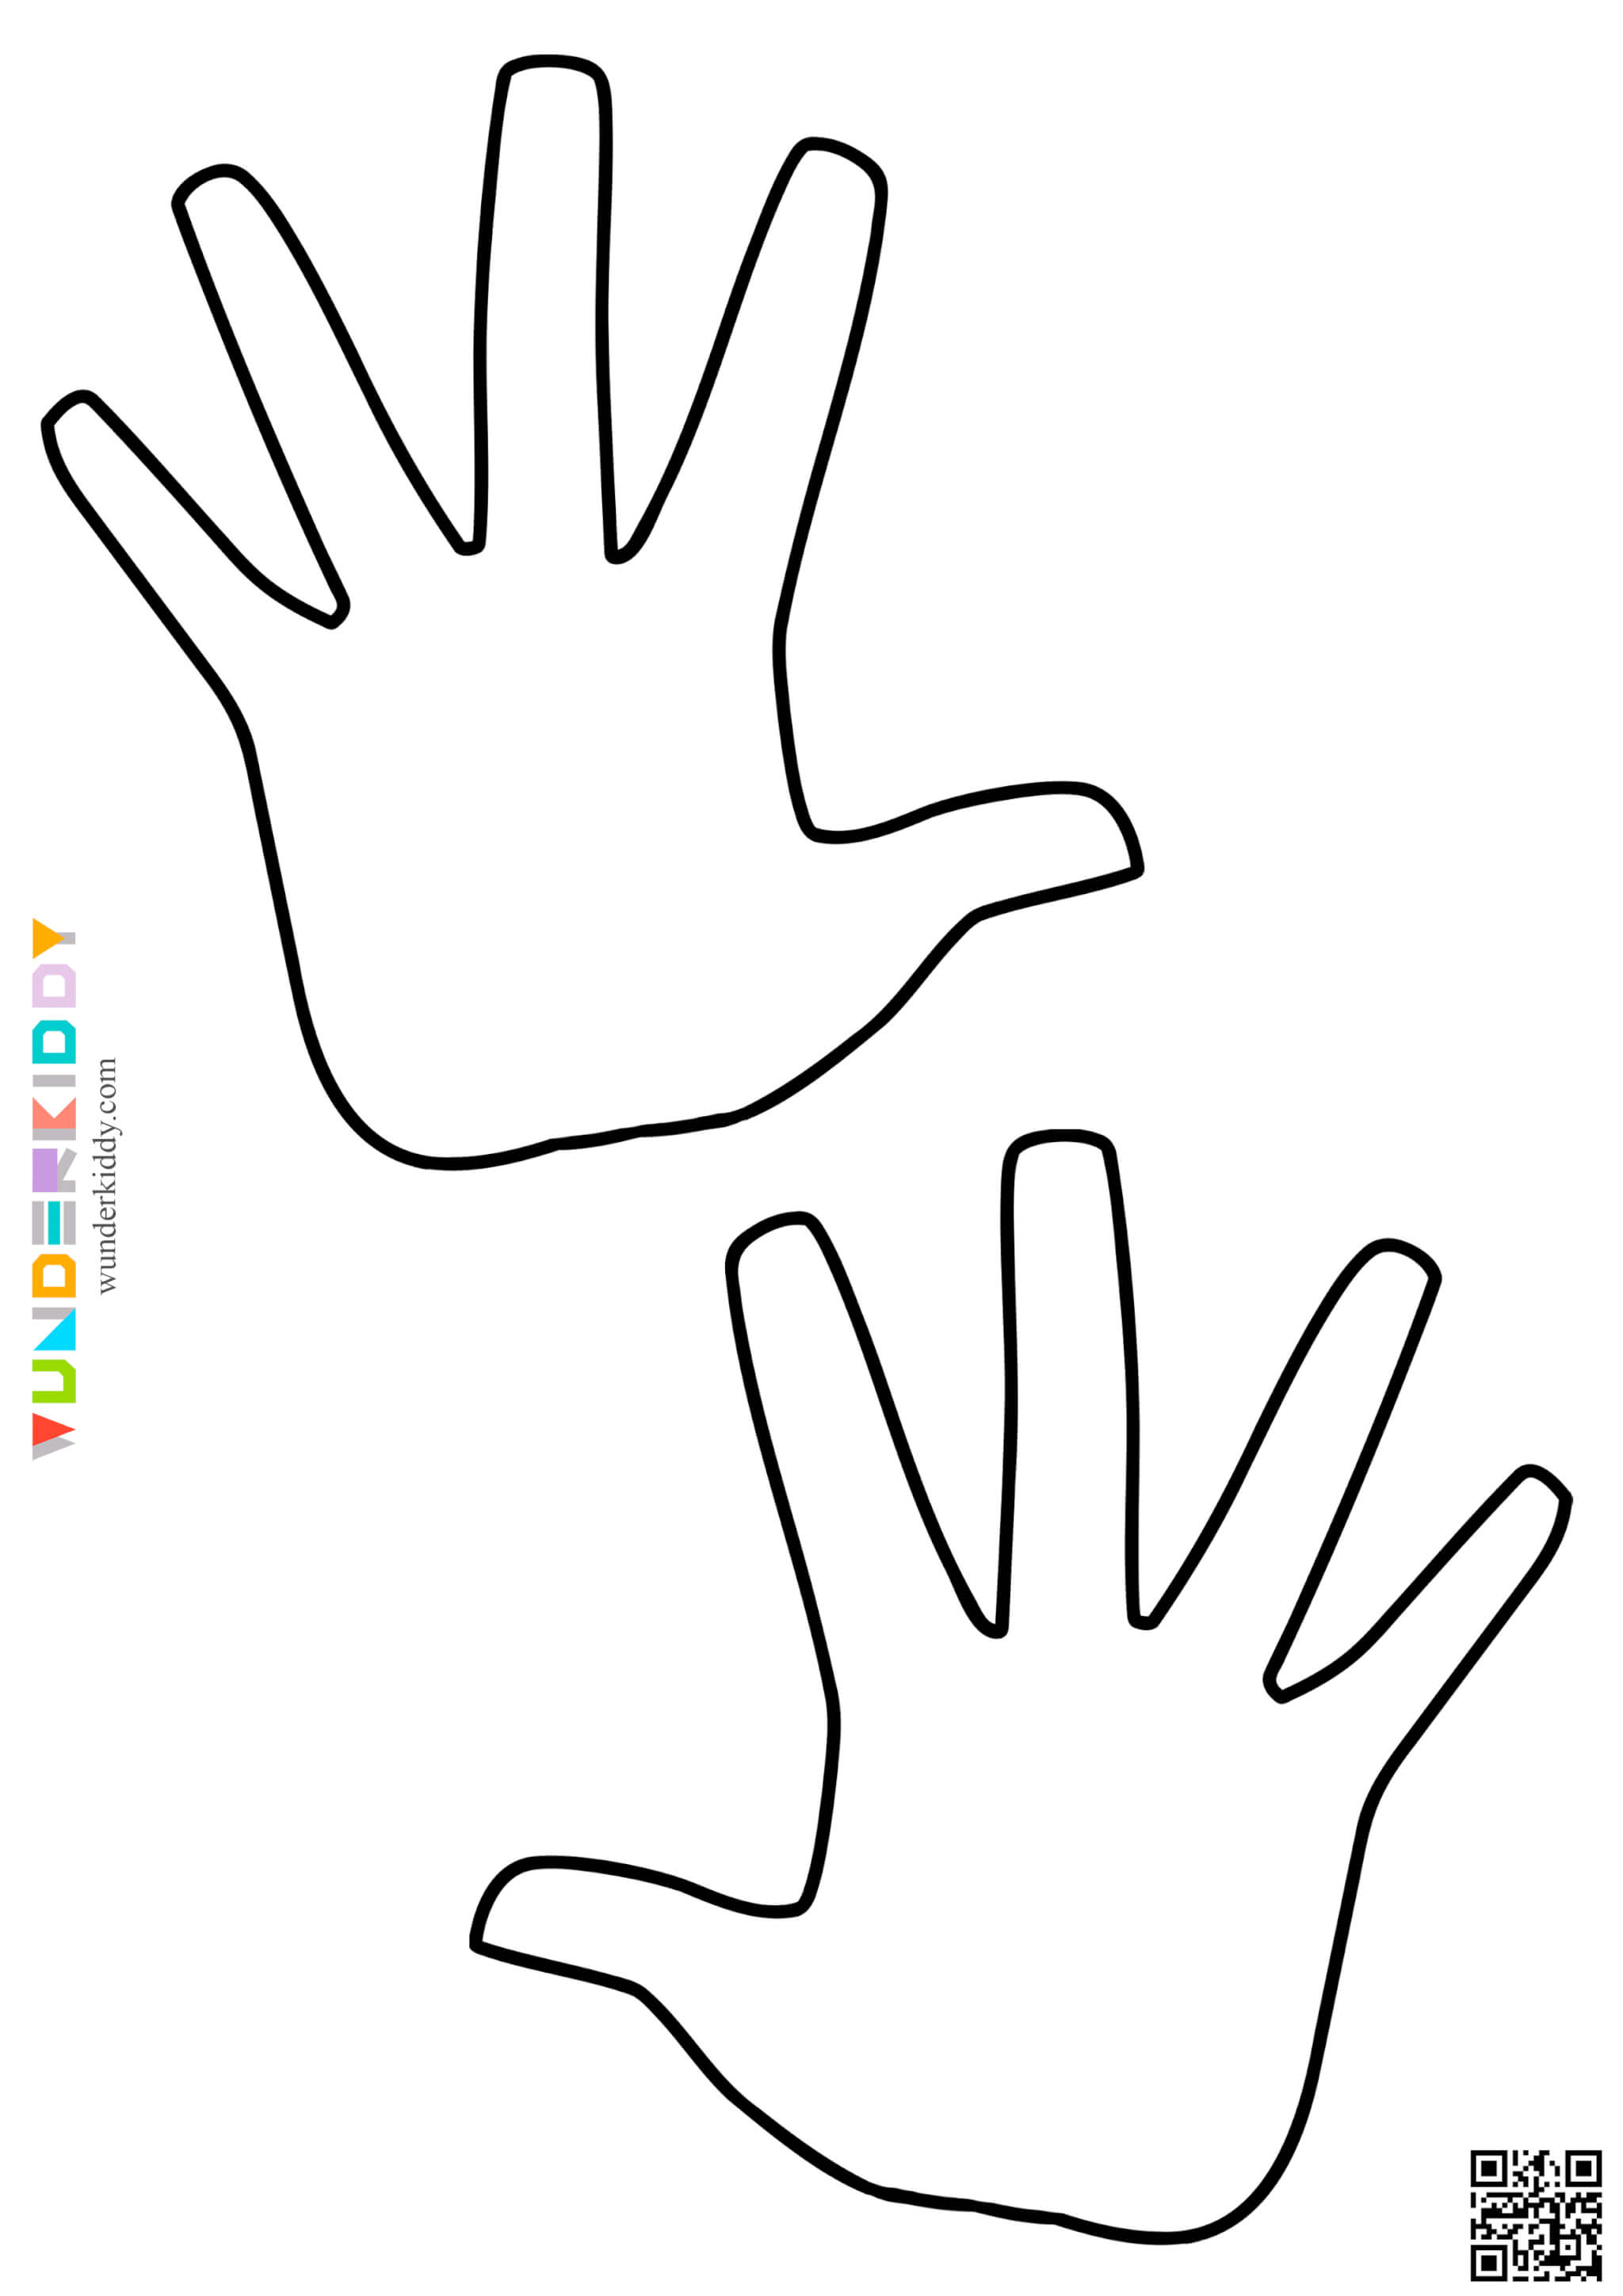 Printable Hands Template - Image 4